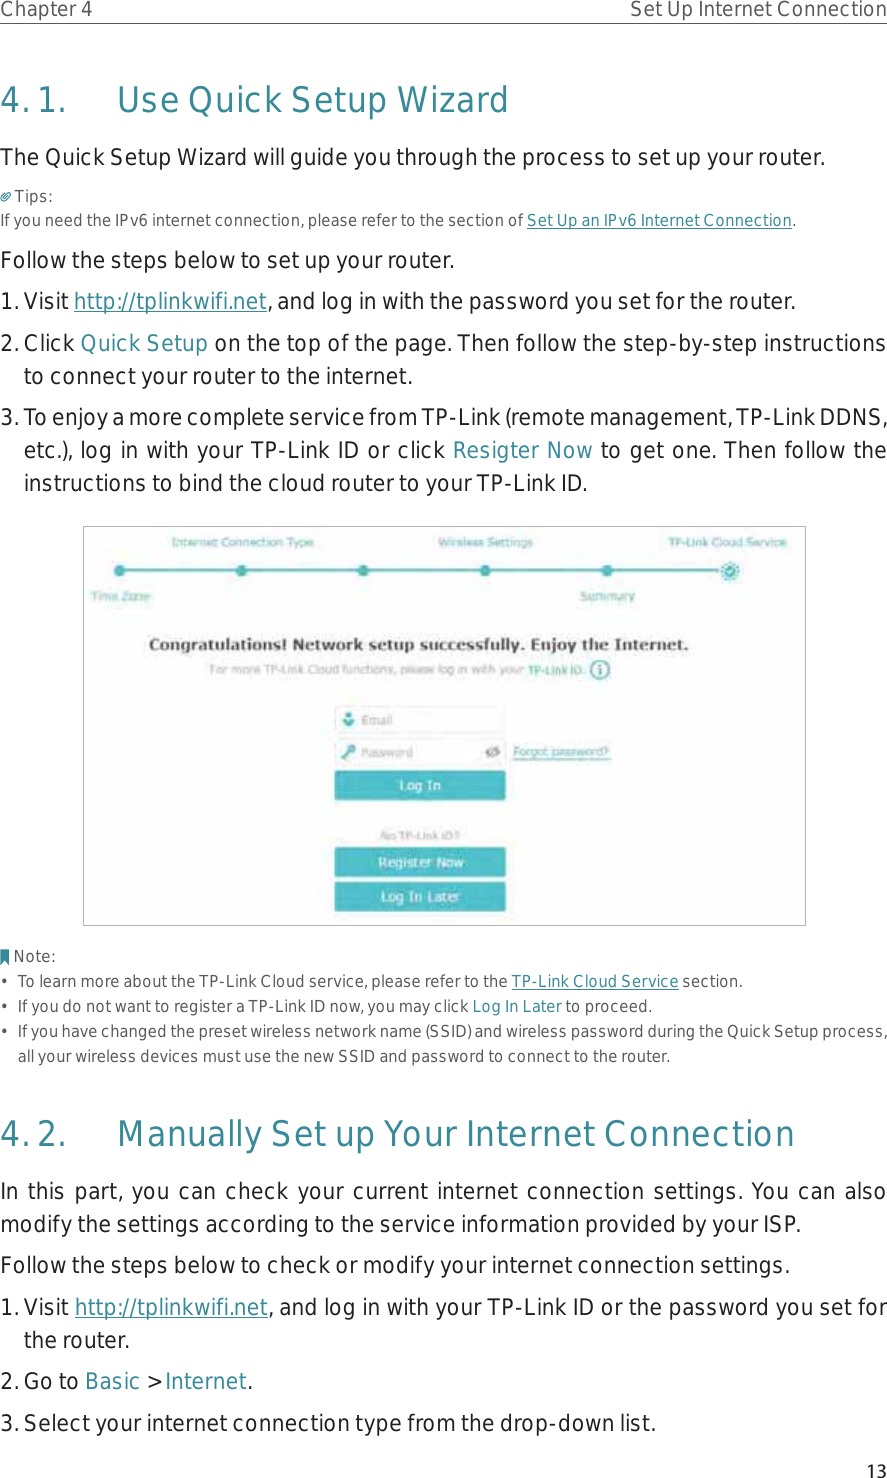 13Chapter 4 Set Up Internet Connection4. 1.  Use Quick Setup WizardThe Quick Setup Wizard will guide you through the process to set up your router.Tips:If you need the IPv6 internet connection, please refer to the section of Set Up an IPv6 Internet Connection.Follow the steps below to set up your router.1. Visit http://tplinkwifi.net, and log in with the password you set for the router.2. Click Quick Setup on the top of the page. Then follow the step-by-step instructions to connect your router to the internet.3. To enjoy a more complete service from TP-Link (remote management, TP-Link DDNS, etc.), log in with your TP-Link ID or click Resigter Now to get one. Then follow the instructions to bind the cloud router to your TP-Link ID.Note:•  To learn more about the TP-Link Cloud service, please refer to the TP-Link Cloud Service section.•  If you do not want to register a TP-Link ID now, you may click Log In Later to proceed.•  If you have changed the preset wireless network name (SSID) and wireless password during the Quick Setup process, all your wireless devices must use the new SSID and password to connect to the router.4. 2.  Manually Set up Your Internet Connection In this part, you can check your current internet connection settings. You can also modify the settings according to the service information provided by your ISP.Follow the steps below to check or modify your internet connection settings.1. Visit http://tplinkwifi.net, and log in with your TP-Link ID or the password you set for the router.2. Go to Basic &gt; Internet.3. Select your internet connection type from the drop-down list. 